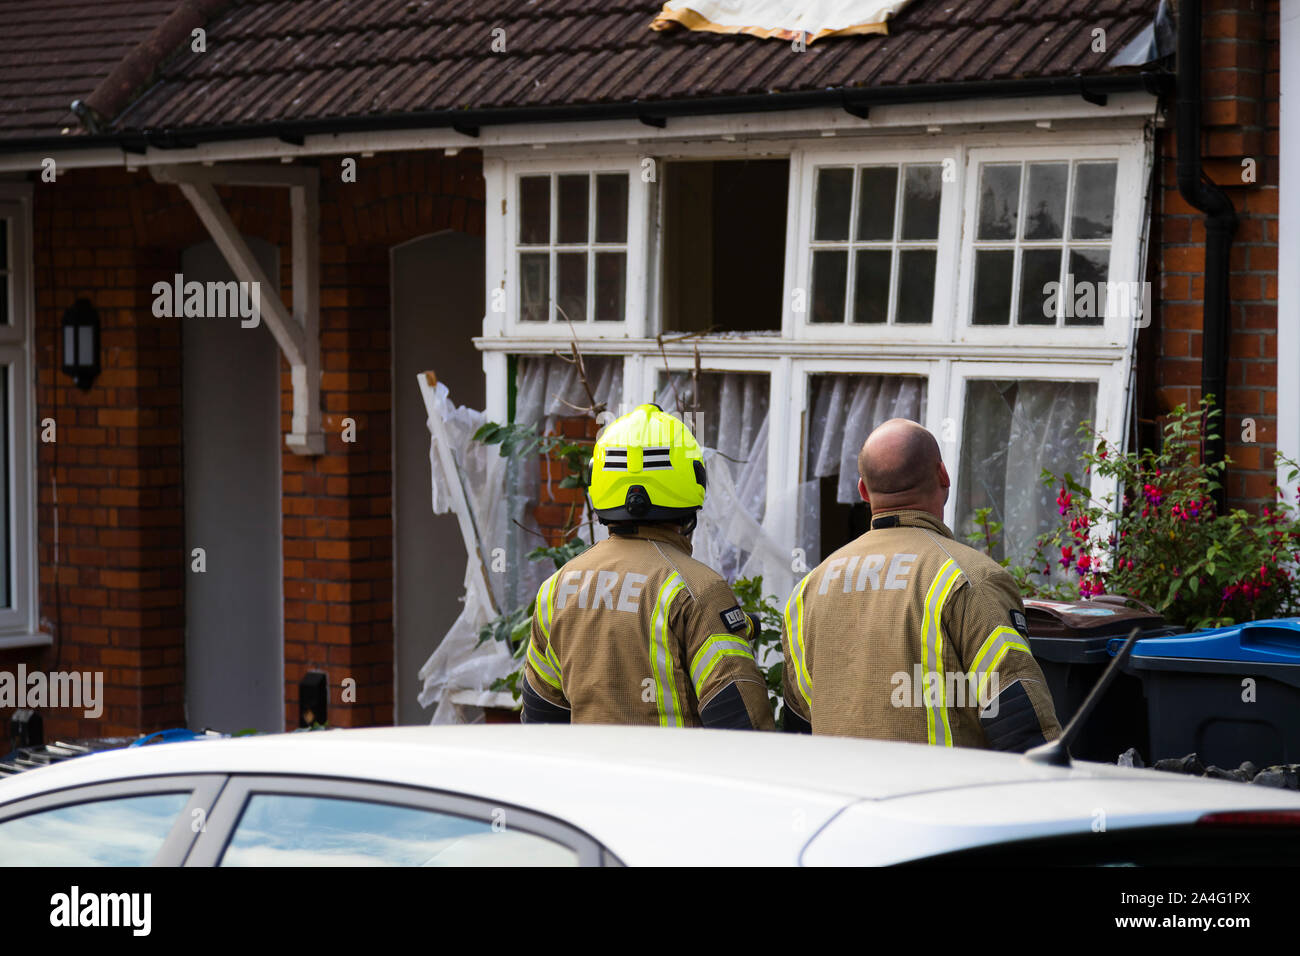 Two firefighters look at a damaged set of front windows after a large gas explosion on Foxley Gardens, a terraced street in south London. The house's Stock Photo